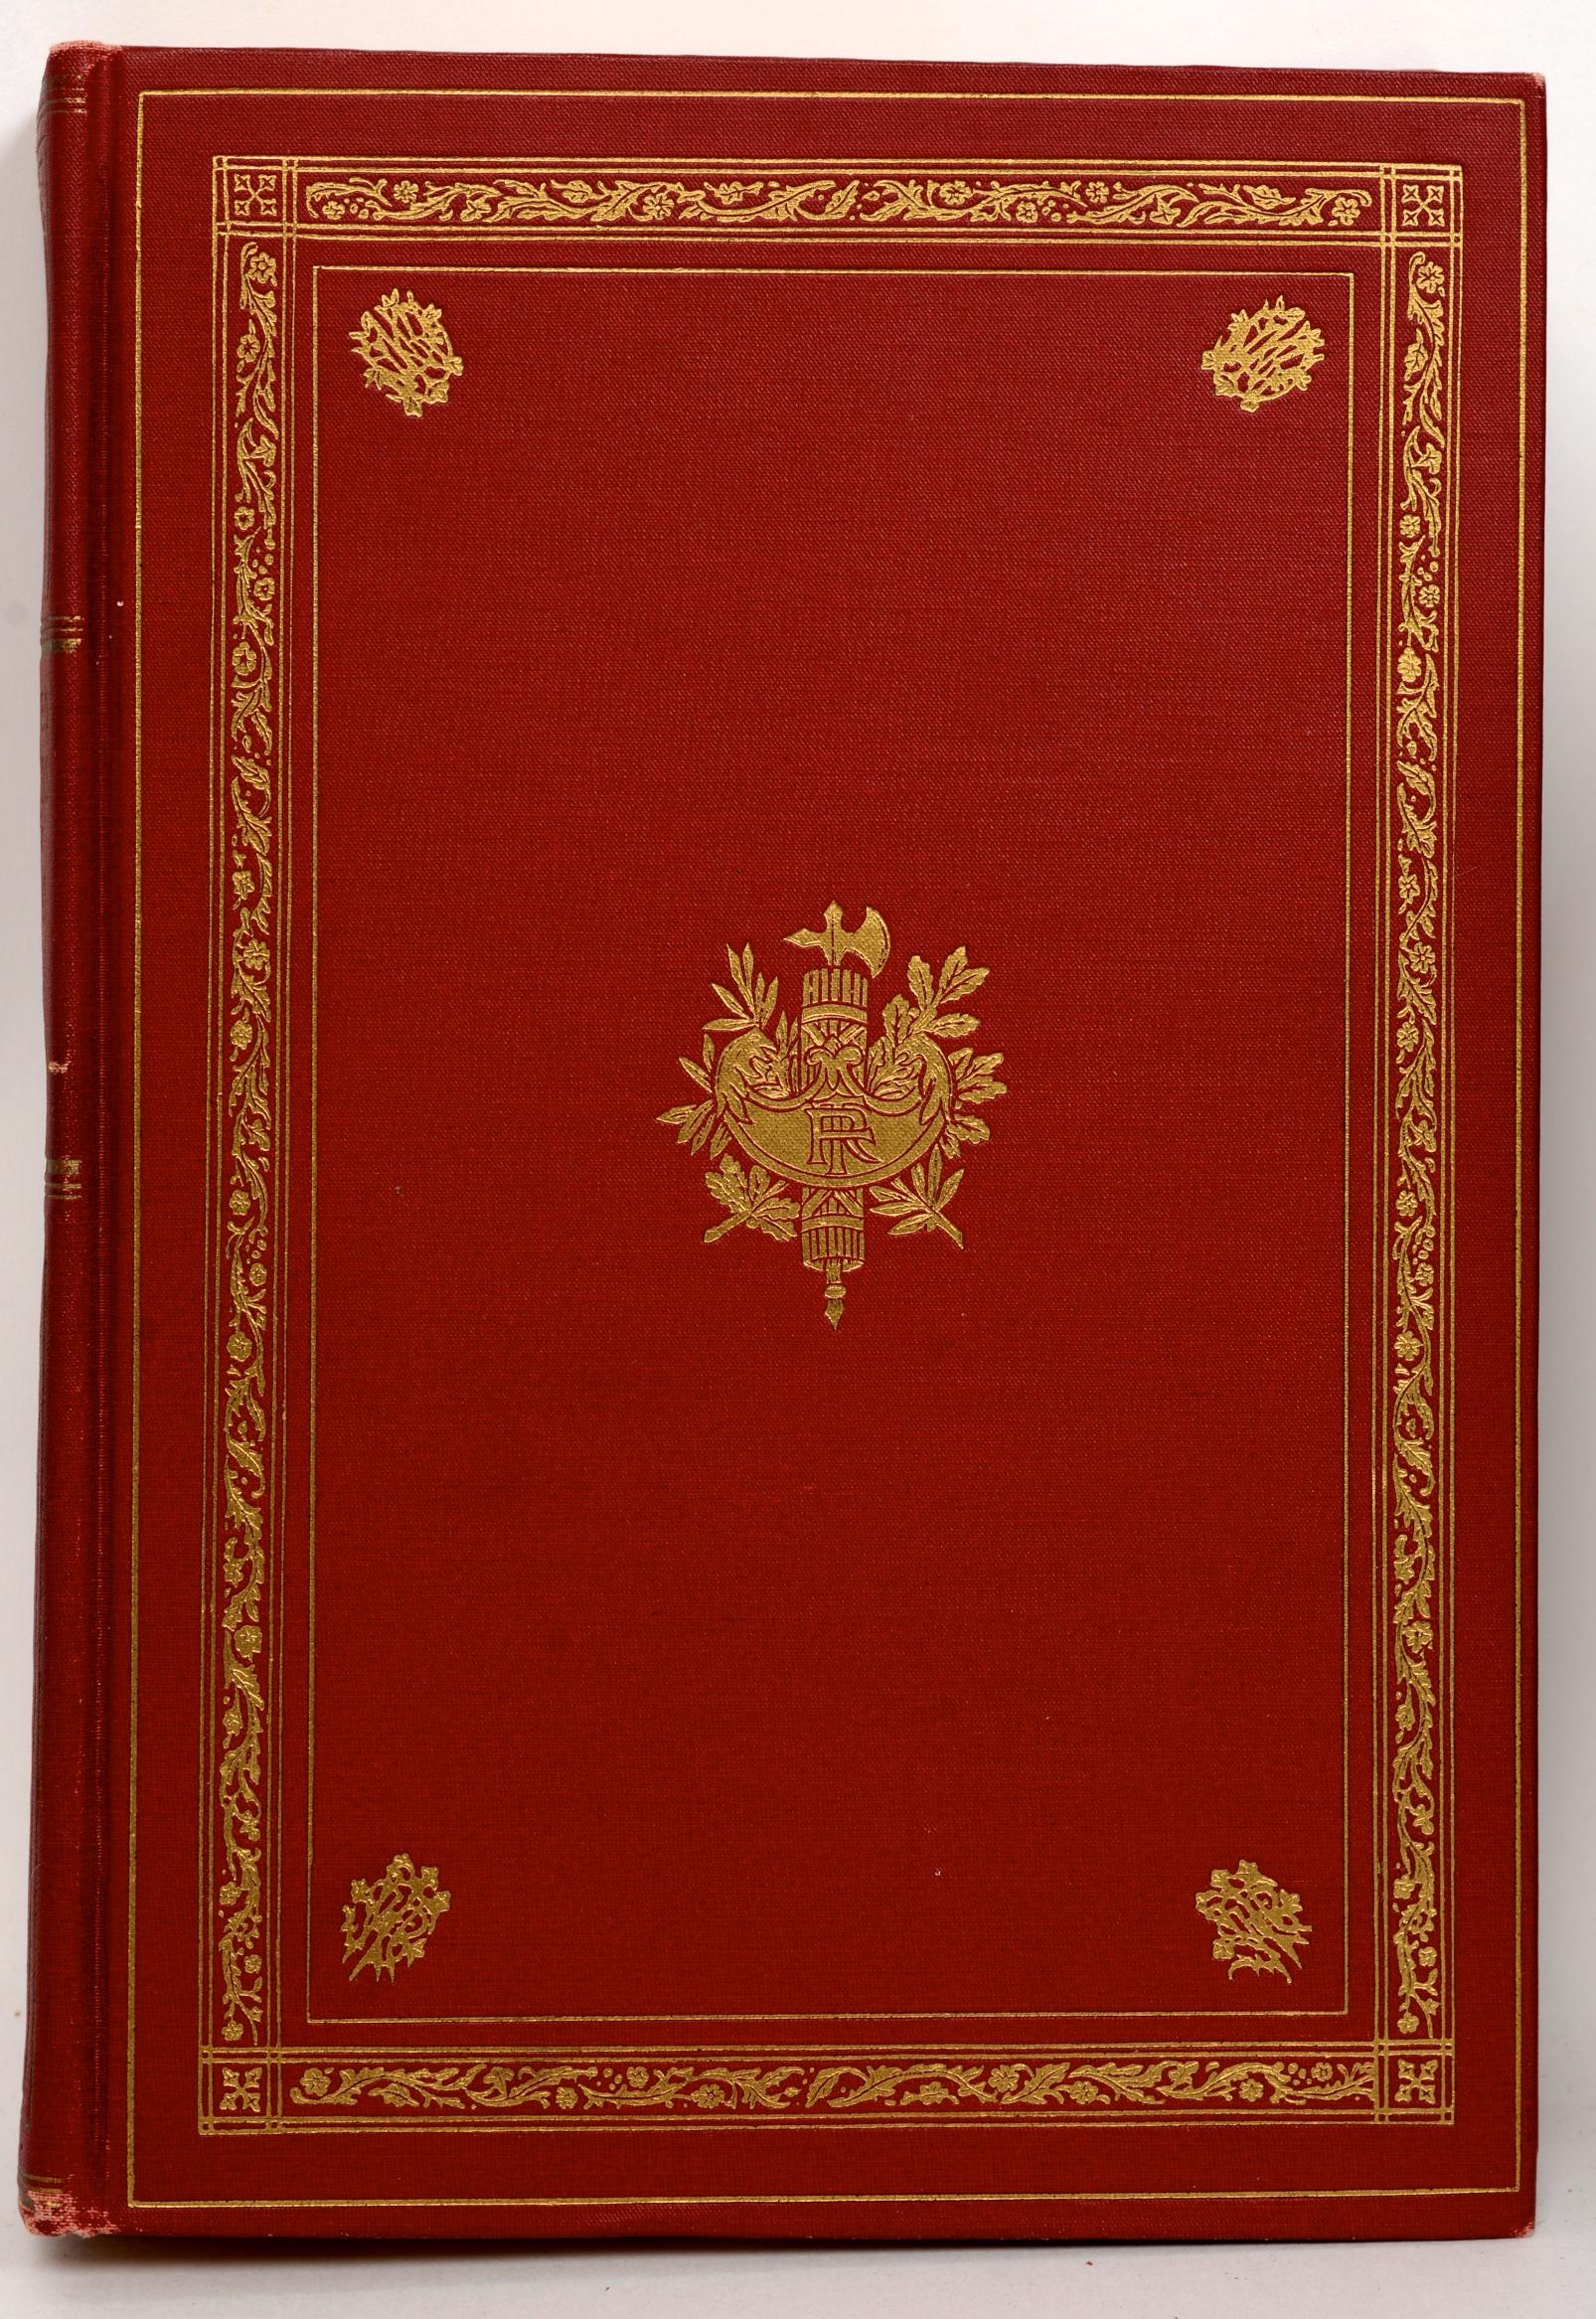 The Great Events of Great War in 7 Volumes Complete. The National Alumni, 1920. 7 vols. First edition hardcovers. This set done for Henry J. McKenney, Lieutenant 46th Infantry, 9th Division U.S. Army. Plate signed by the Commander and Chief Huston